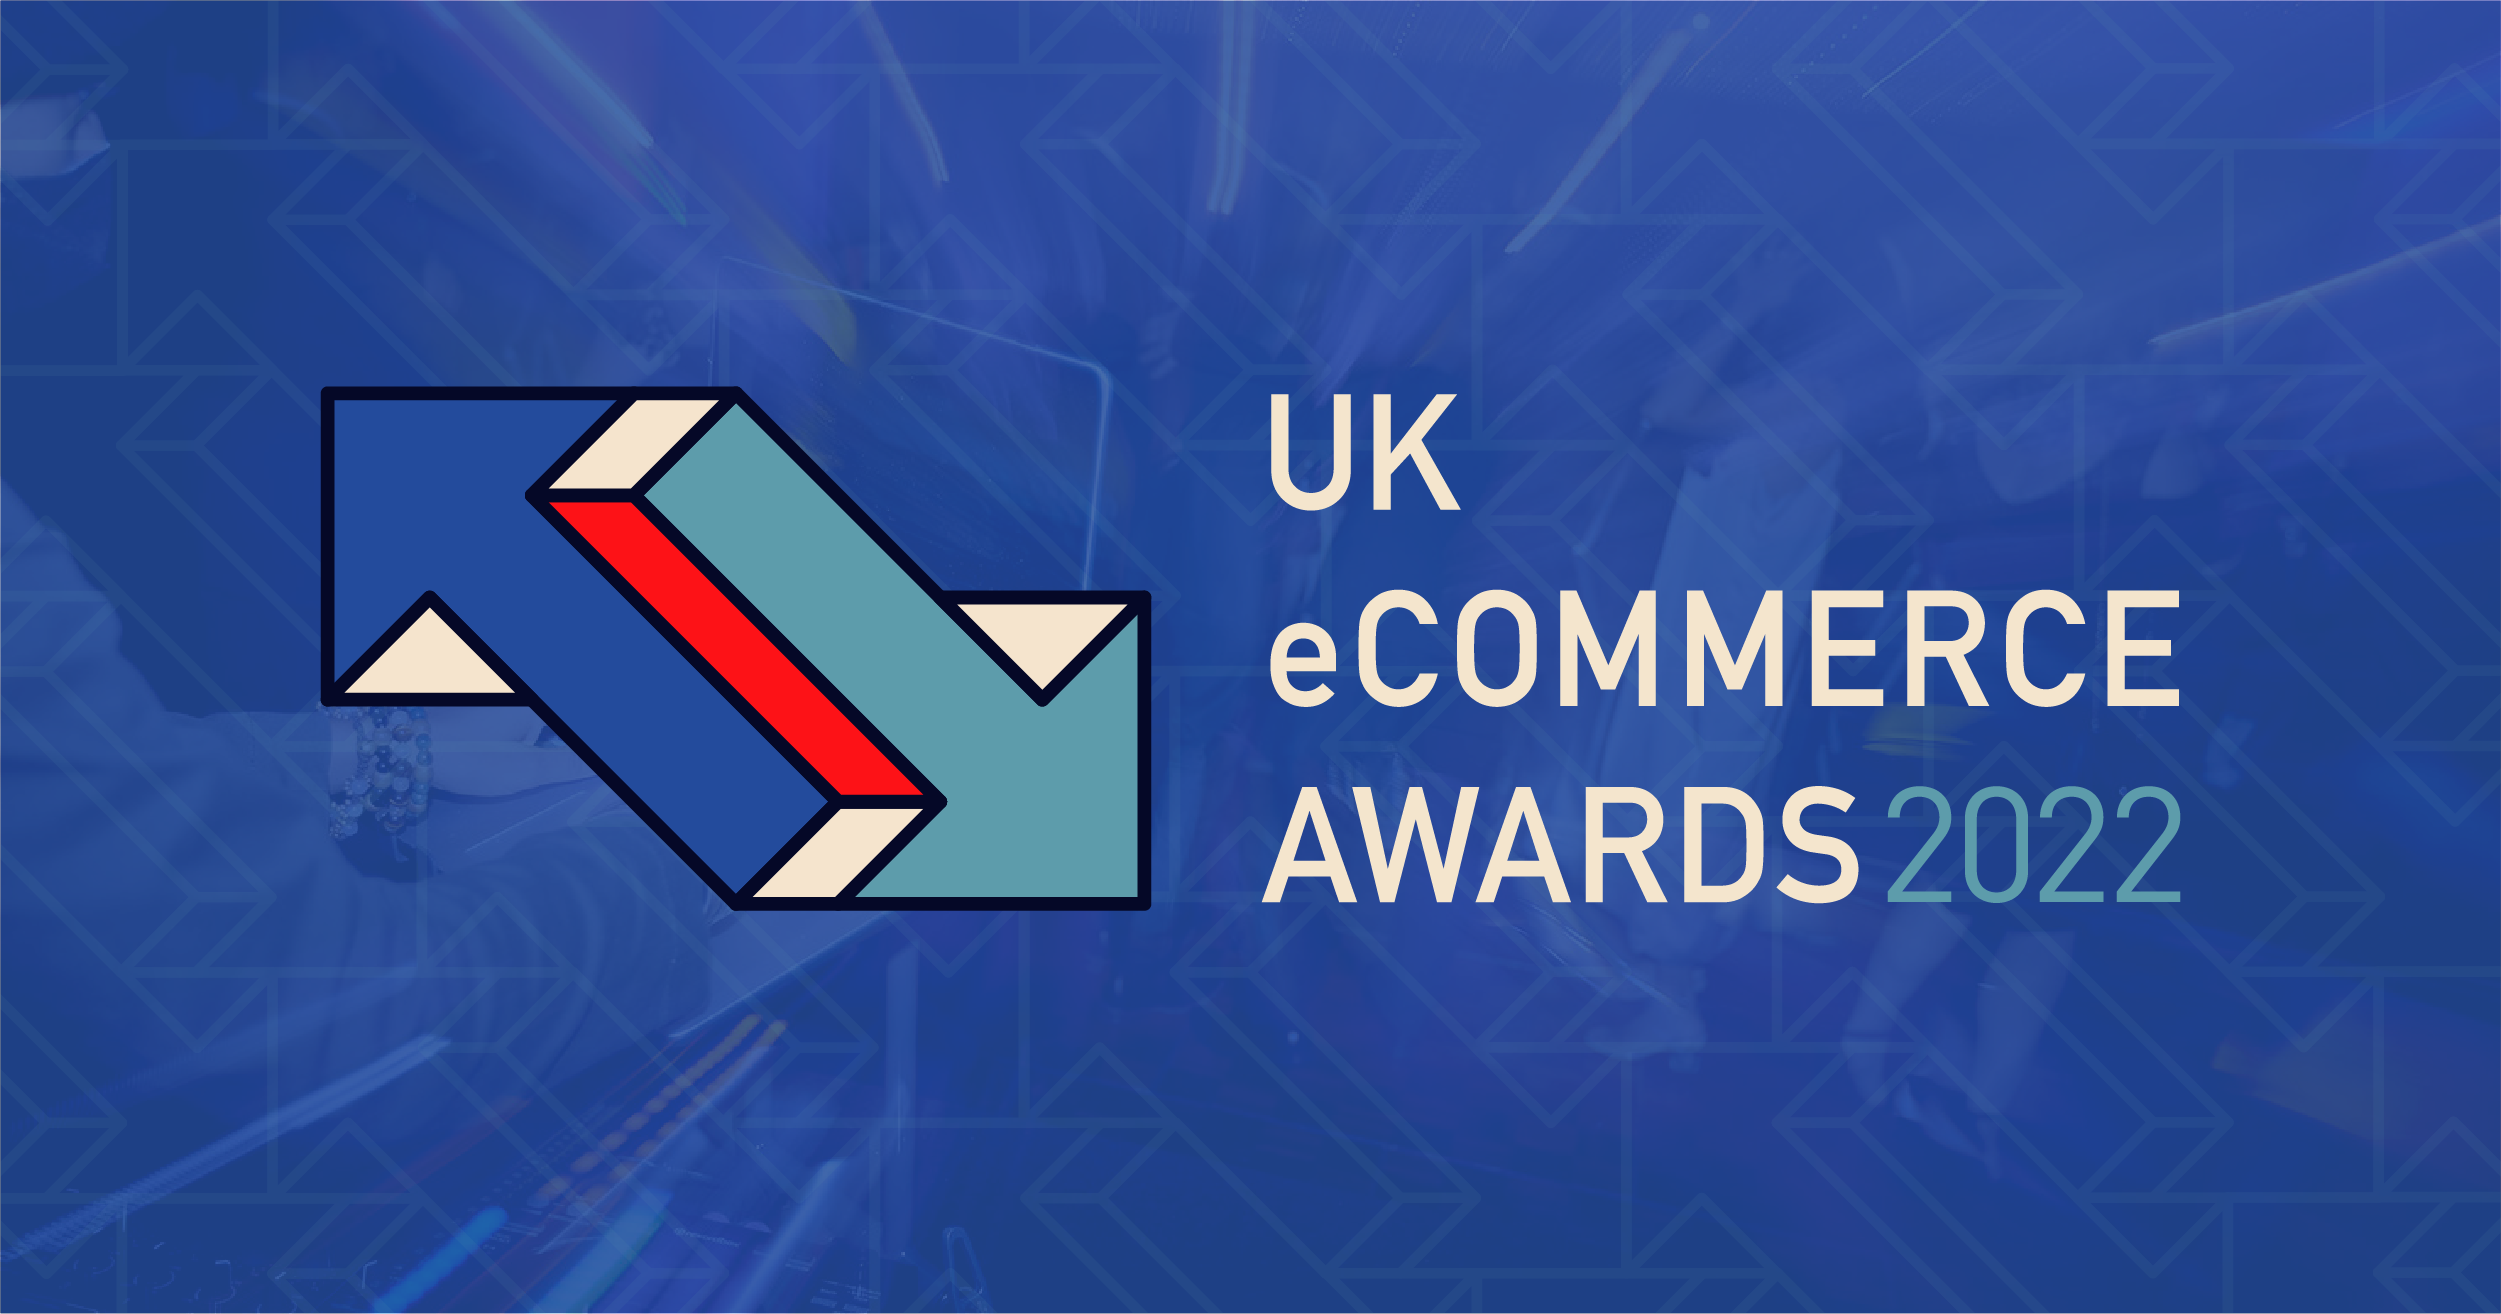 Courageous Nomination: We have been shortlised for a UK eCommerce Award 2022